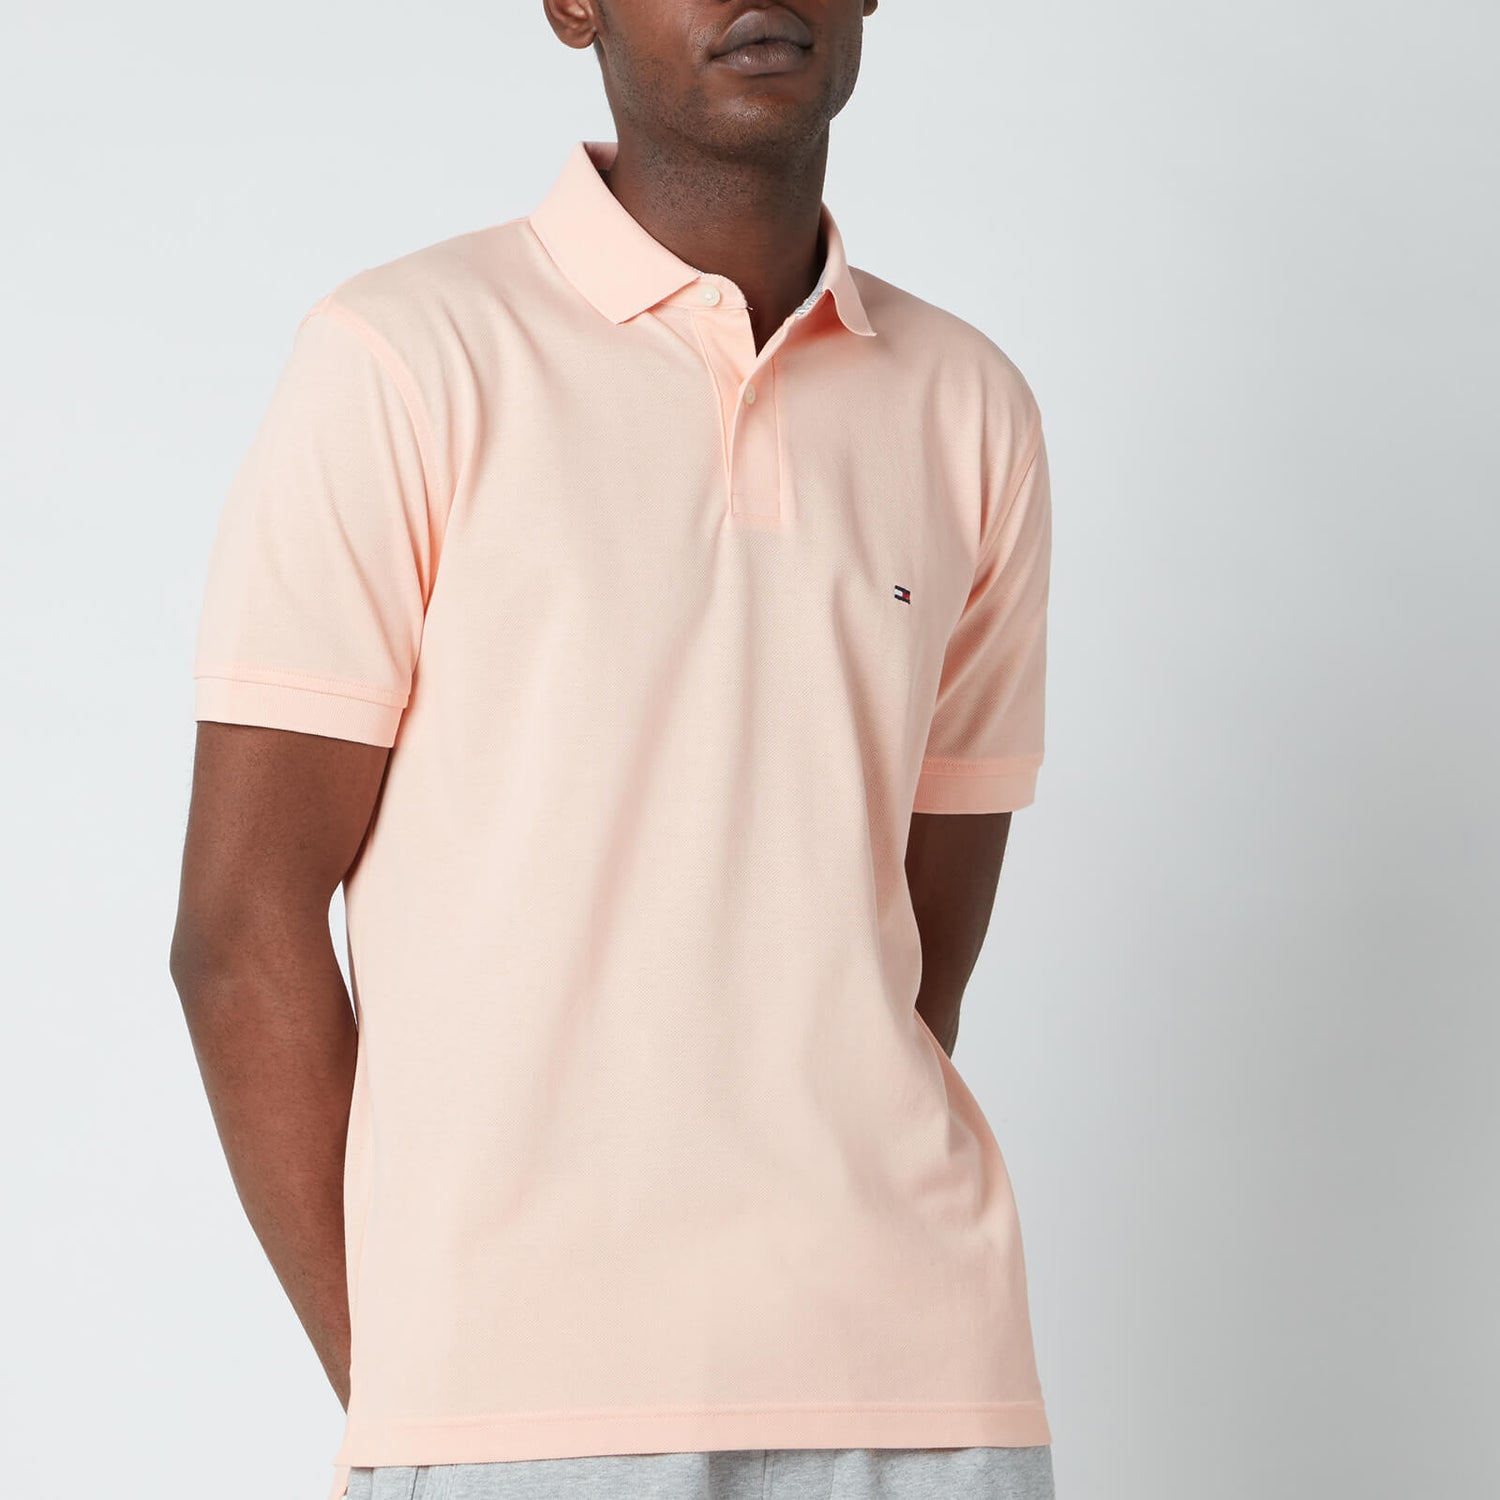 Tommy Hilfiger Men's 1985 Regular Fit Polo Shirt - Delicate Peach